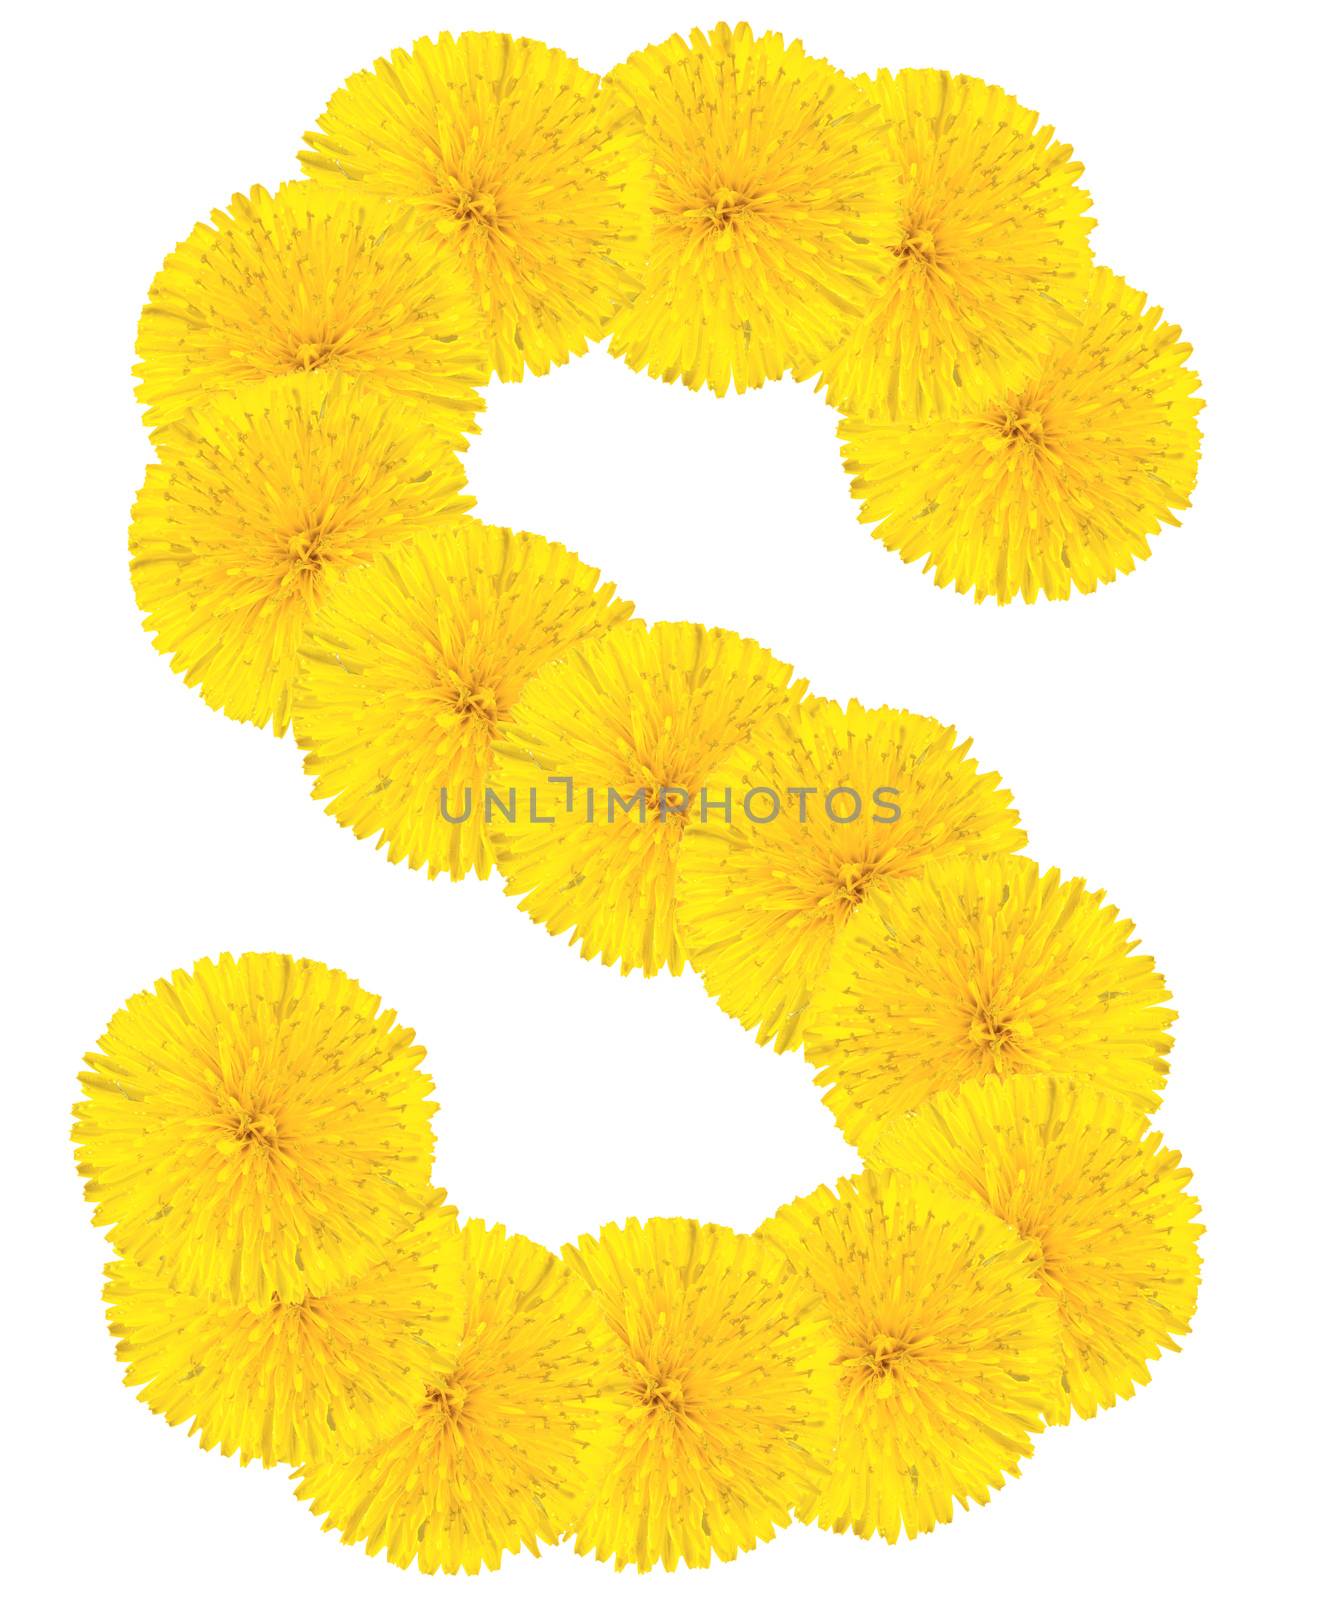 Letter S made from dandelions by Valengilda